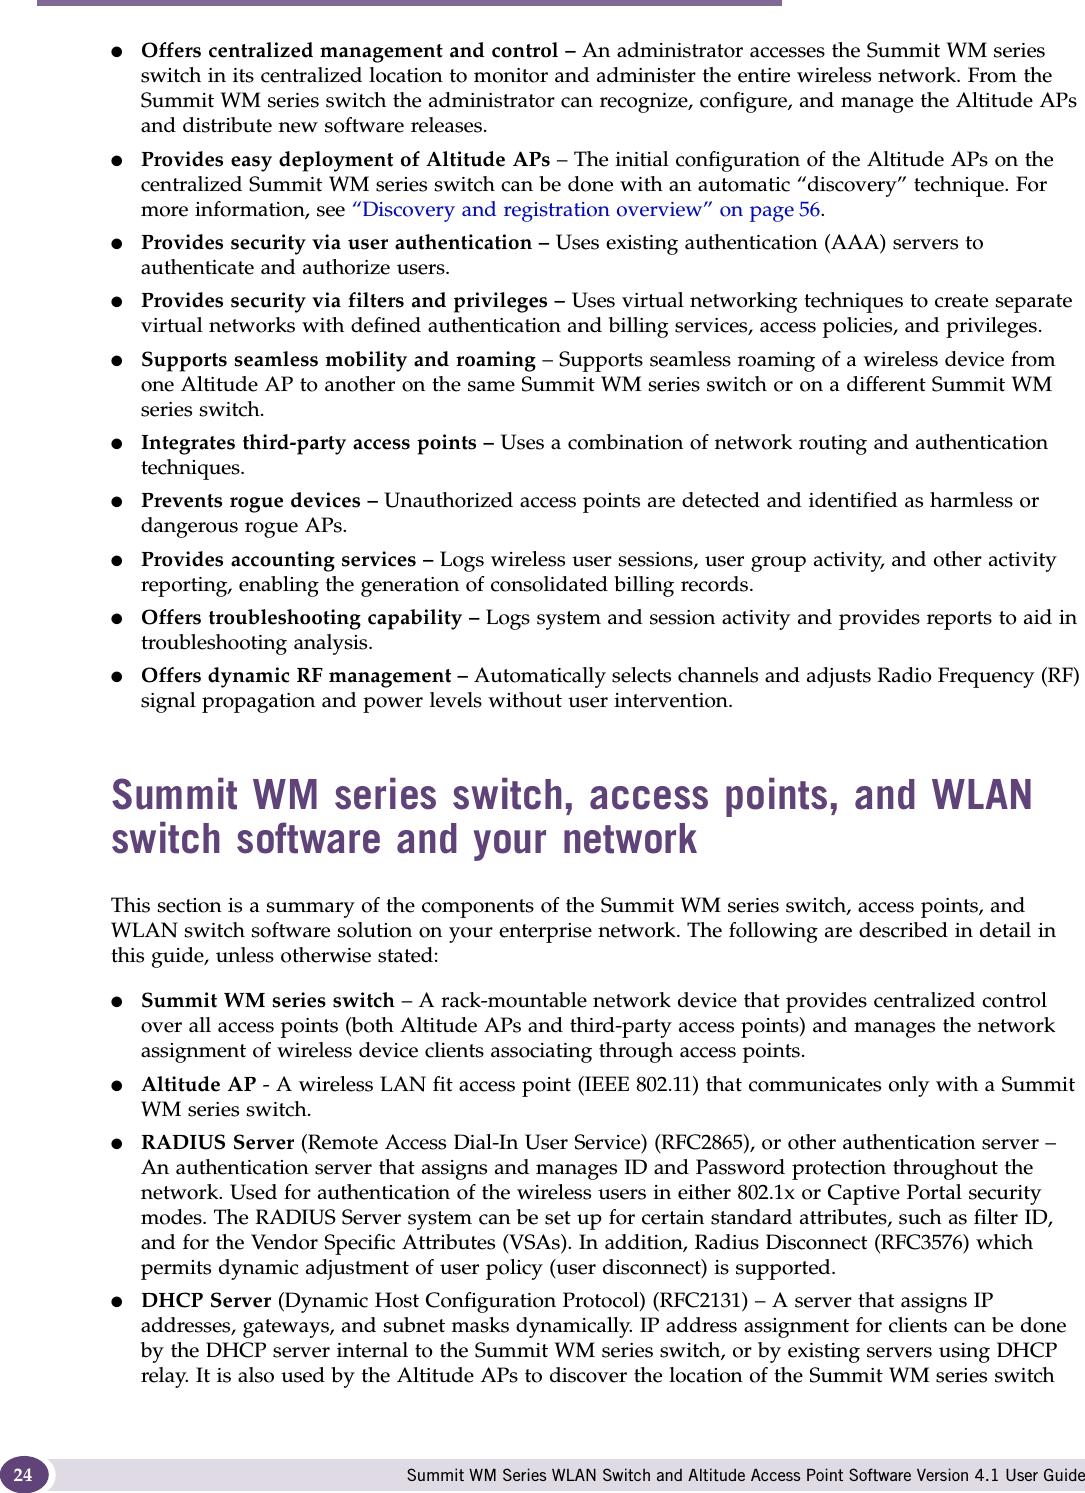 Overview of the Summit WM series switch, access points, and WLAN switch software solution Summit WM Series WLAN Switch and Altitude Access Point Software Version 4.1 User Guide24●Offers centralized management and control – An administrator accesses the Summit WM series switch in its centralized location to monitor and administer the entire wireless network. From the Summit WM series switch the administrator can recognize, configure, and manage the Altitude APs and distribute new software releases.●Provides easy deployment of Altitude APs – The initial configuration of the Altitude APs on the centralized Summit WM series switch can be done with an automatic “discovery” technique. For more information, see “Discovery and registration overview” on page 56.●Provides security via user authentication – Uses existing authentication (AAA) servers to authenticate and authorize users.●Provides security via filters and privileges – Uses virtual networking techniques to create separate virtual networks with defined authentication and billing services, access policies, and privileges.●Supports seamless mobility and roaming – Supports seamless roaming of a wireless device from one Altitude AP to another on the same Summit WM series switch or on a different Summit WM series switch.●Integrates third-party access points – Uses a combination of network routing and authentication techniques.●Prevents rogue devices – Unauthorized access points are detected and identified as harmless or dangerous rogue APs.●Provides accounting services – Logs wireless user sessions, user group activity, and other activity reporting, enabling the generation of consolidated billing records.●Offers troubleshooting capability – Logs system and session activity and provides reports to aid in troubleshooting analysis.●Offers dynamic RF management – Automatically selects channels and adjusts Radio Frequency (RF) signal propagation and power levels without user intervention. Summit WM series switch, access points, and WLAN switch software and your networkThis section is a summary of the components of the Summit WM series switch, access points, and WLAN switch software solution on your enterprise network. The following are described in detail in this guide, unless otherwise stated:●Summit WM series switch – A rack-mountable network device that provides centralized control over all access points (both Altitude APs and third-party access points) and manages the network assignment of wireless device clients associating through access points.●Altitude AP - A wireless LAN fit access point (IEEE 802.11) that communicates only with a Summit WM series switch.●RADIUS Server (Remote Access Dial-In User Service) (RFC2865), or other authentication server – An authentication server that assigns and manages ID and Password protection throughout the network. Used for authentication of the wireless users in either 802.1x or Captive Portal security modes. The RADIUS Server system can be set up for certain standard attributes, such as filter ID, and for the Vendor Specific Attributes (VSAs). In addition, Radius Disconnect (RFC3576) which permits dynamic adjustment of user policy (user disconnect) is supported.●DHCP Server (Dynamic Host Configuration Protocol) (RFC2131) – A server that assigns IP addresses, gateways, and subnet masks dynamically. IP address assignment for clients can be done by the DHCP server internal to the Summit WM series switch, or by existing servers using DHCP relay. It is also used by the Altitude APs to discover the location of the Summit WM series switch 